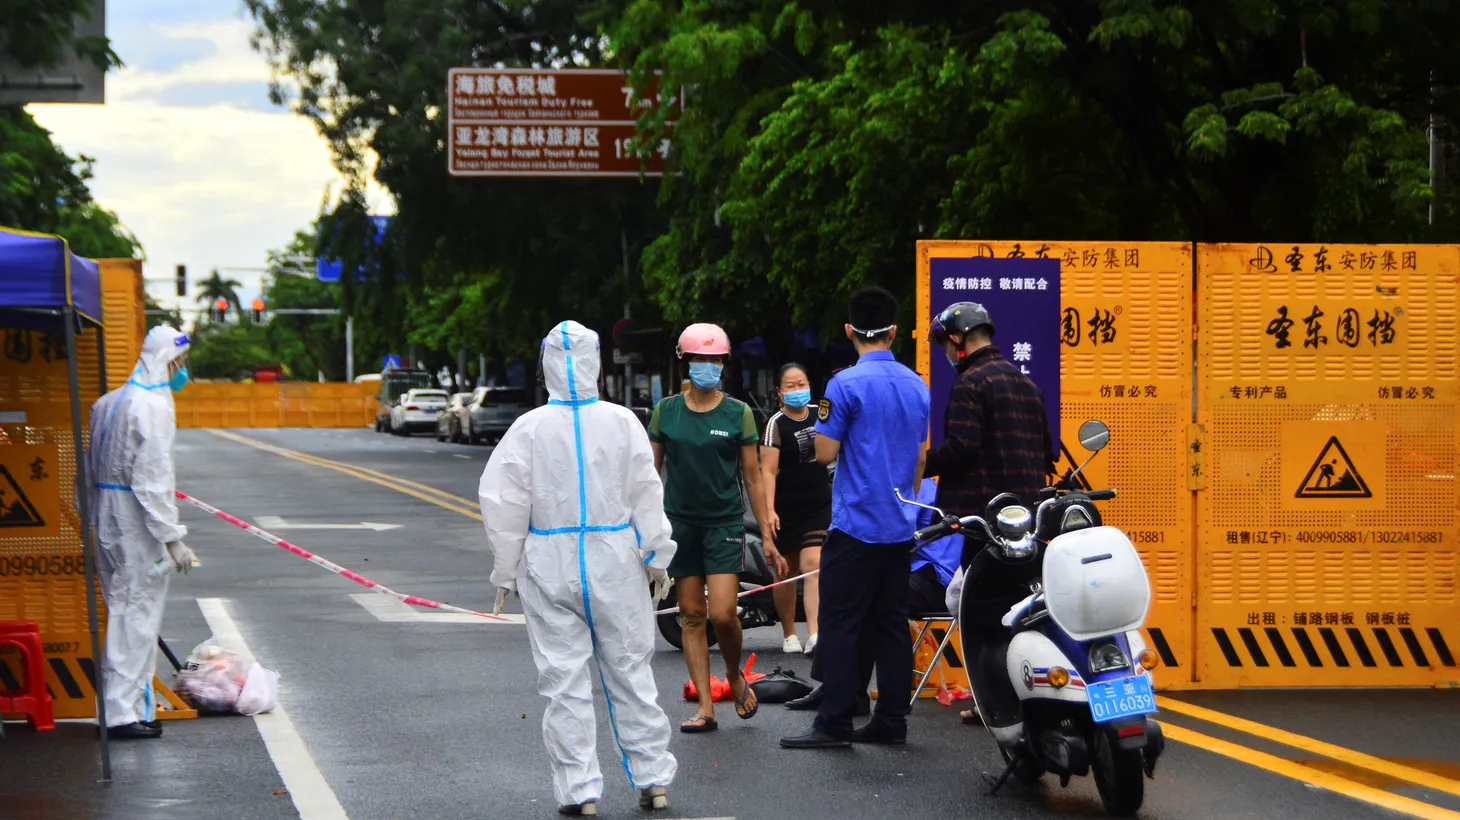 A delivery courier places food near a barricade at an entrance to a residential compound, amid lockdown measures to curb the coronavirus disease (COVID-19) outbreak in Sanya, Hainan province, China, August 8, 2022.